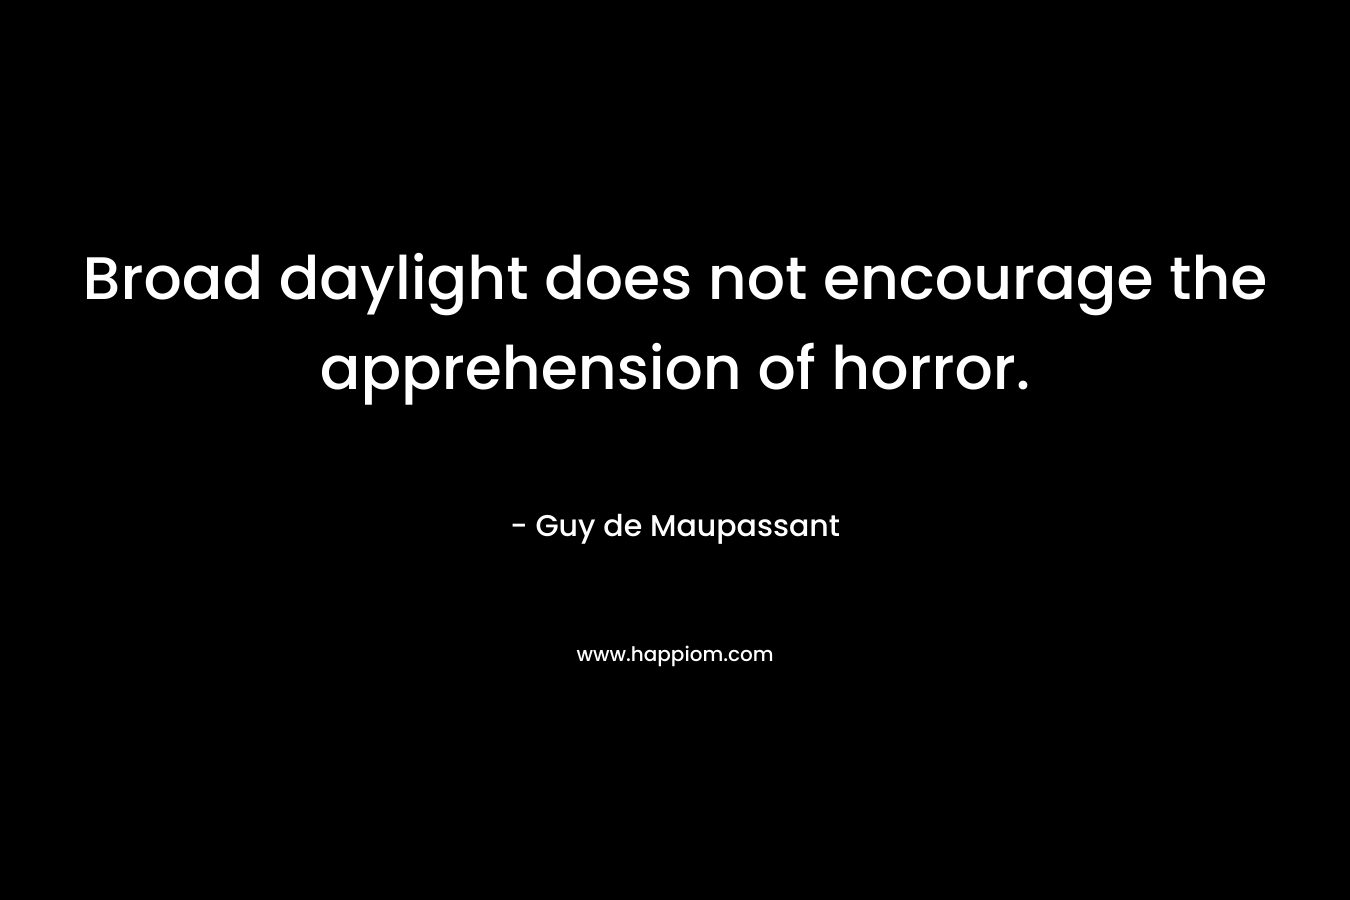 Broad daylight does not encourage the apprehension of horror. – Guy de Maupassant